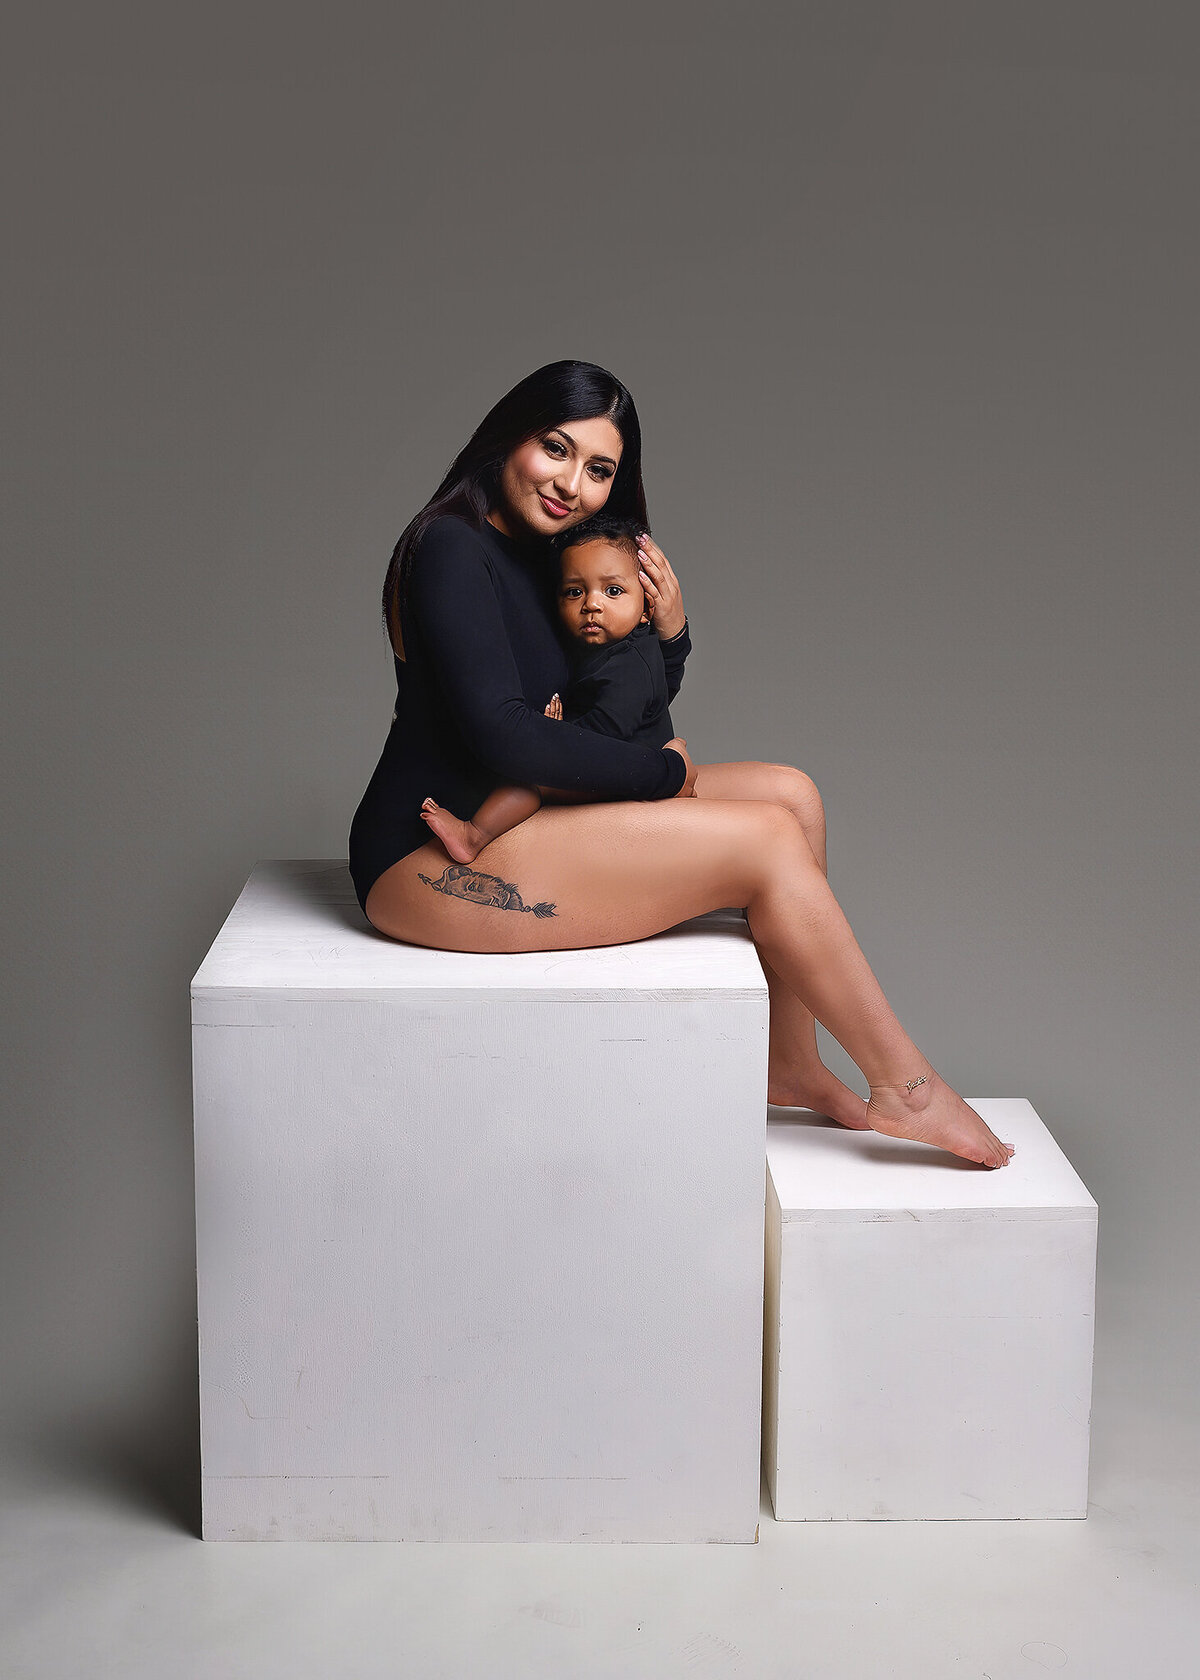 Mom in a black one piece bodysuit with long black hair holding her son who is wearing a black onsie, sitting on white posing blocks in my Phoenix family studio